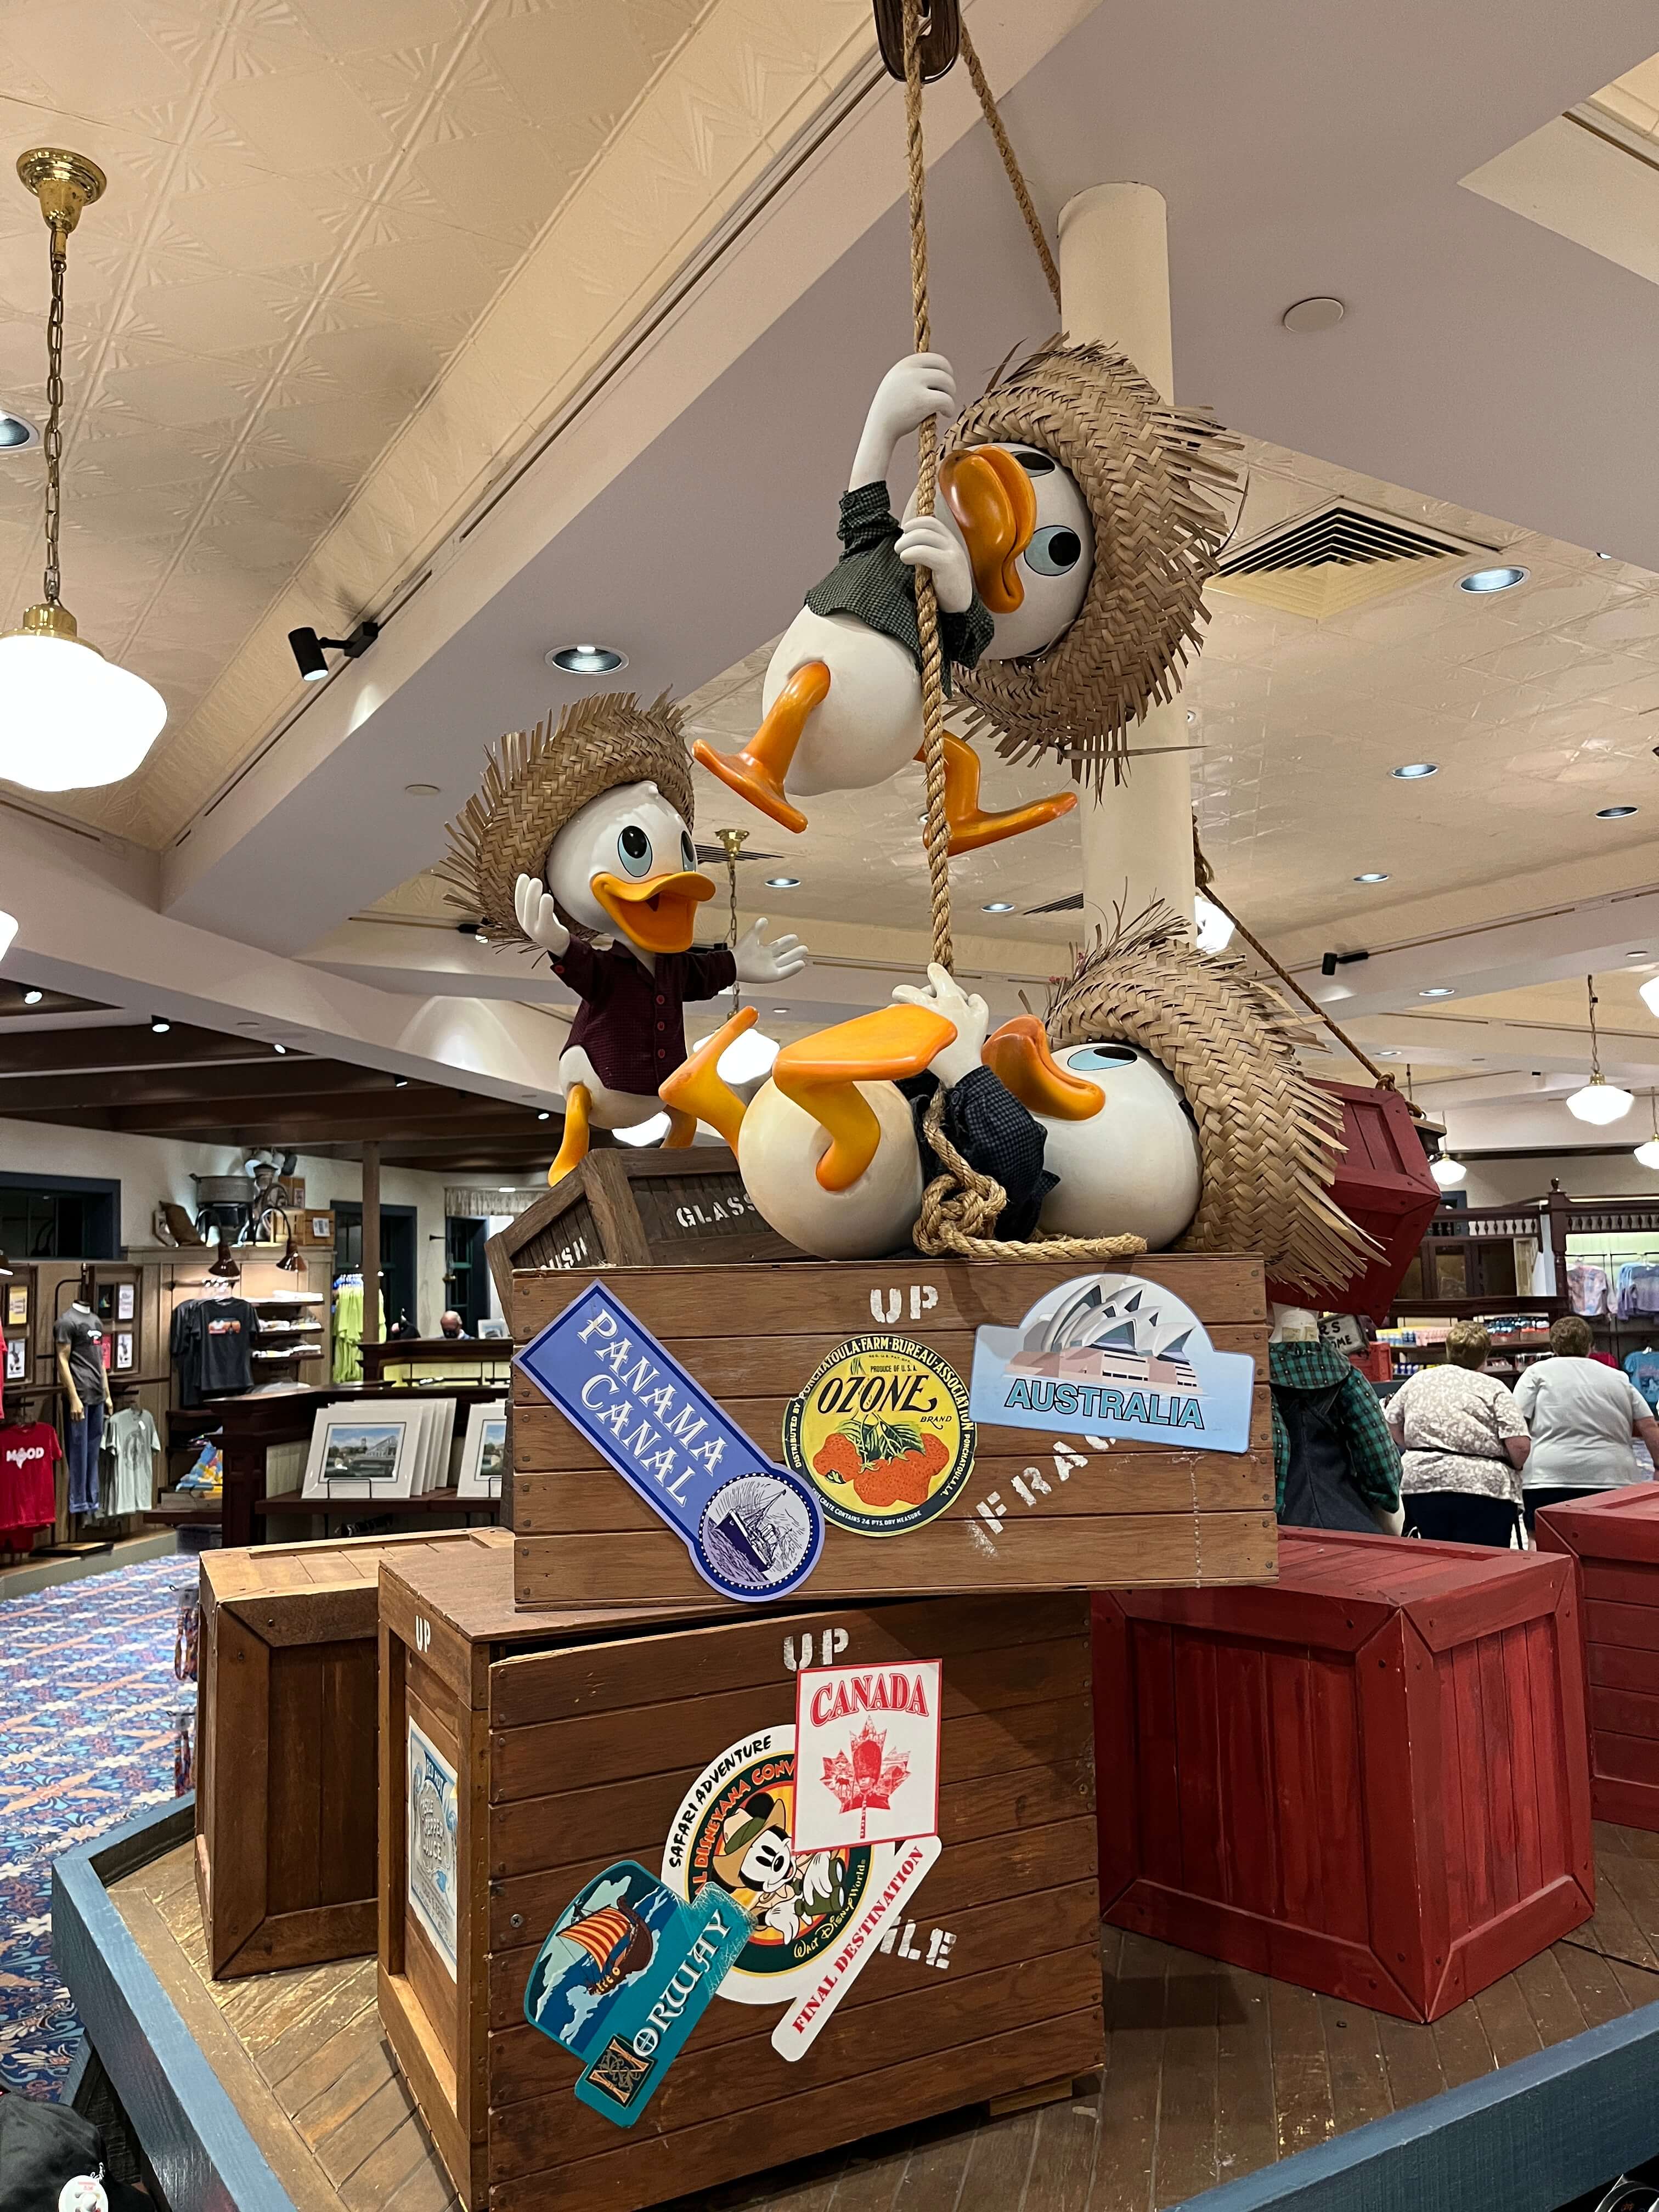 Huey, Dewey, and Louie hang from ropes and stand on piled crates at Fulton's General Store